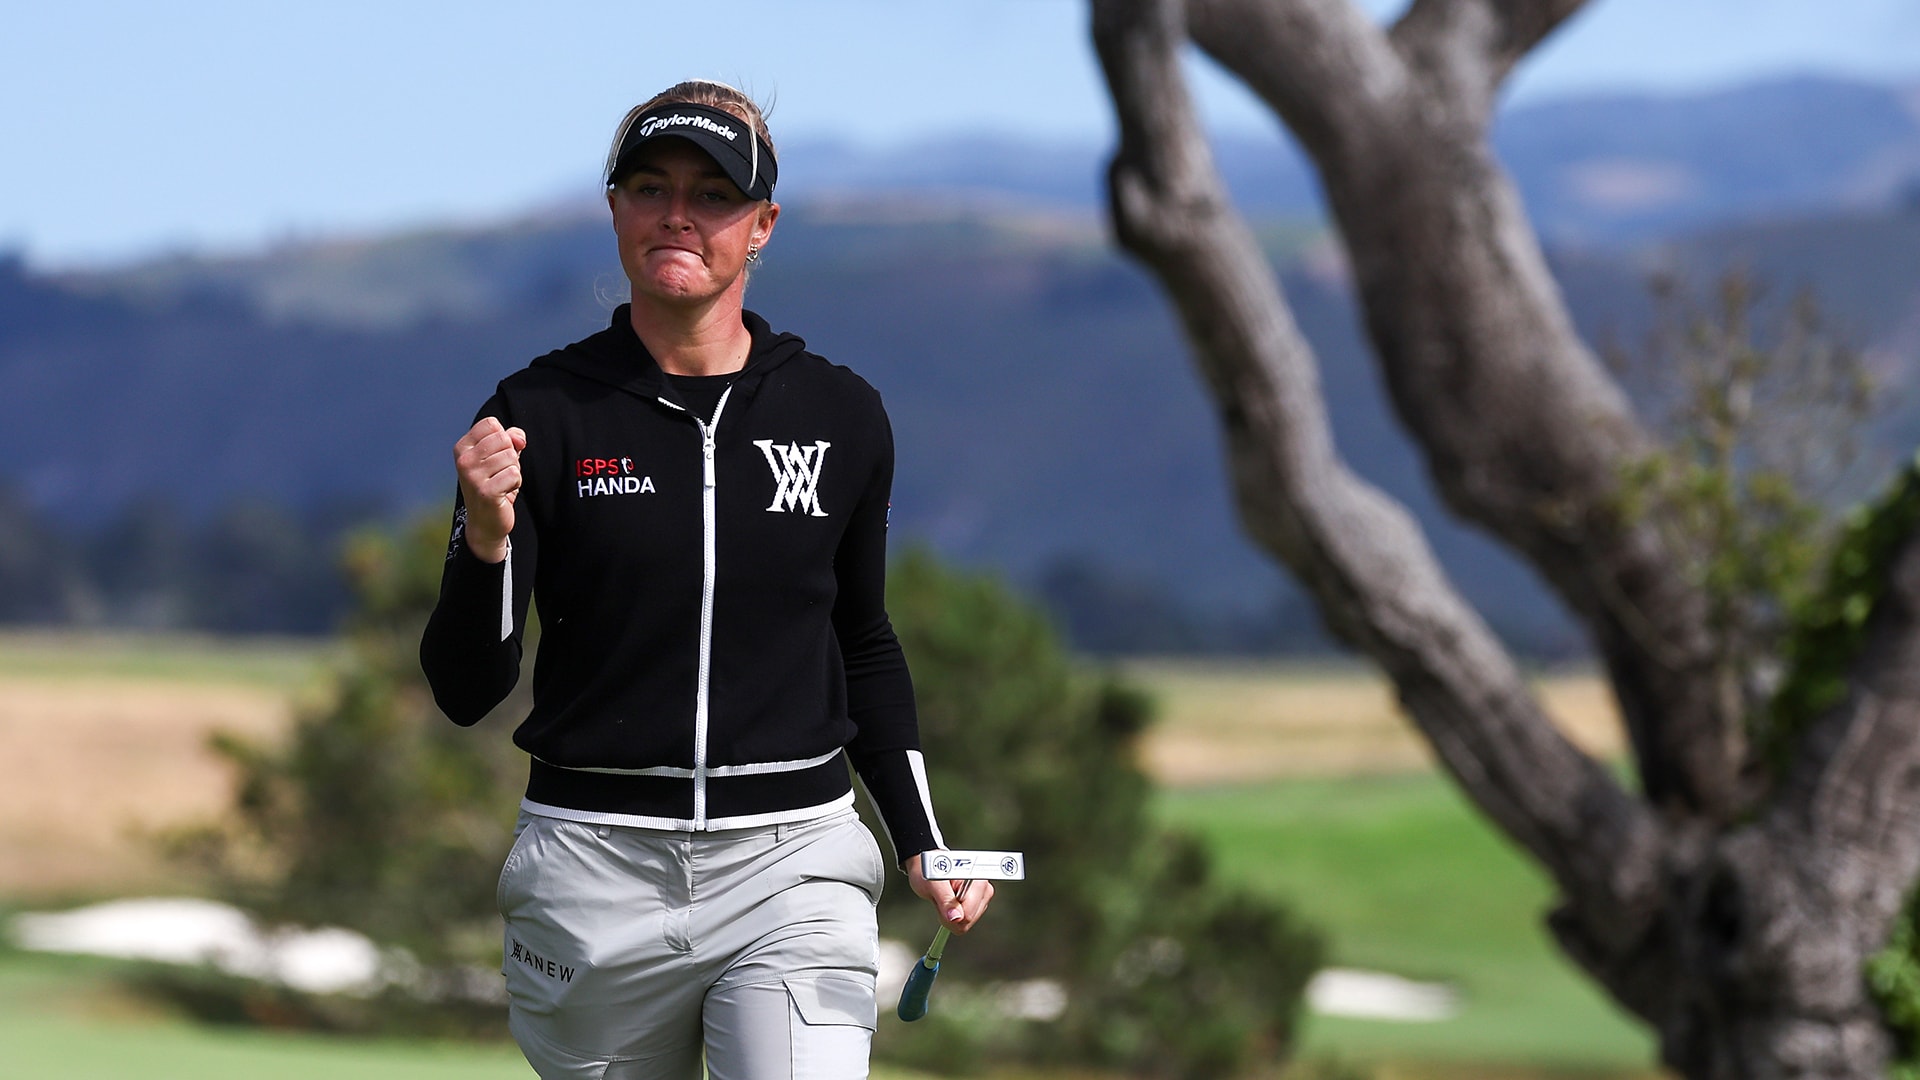 Charley Hull ties for second after nearly pulling off Tiger-like shot at Pebble’s 18th